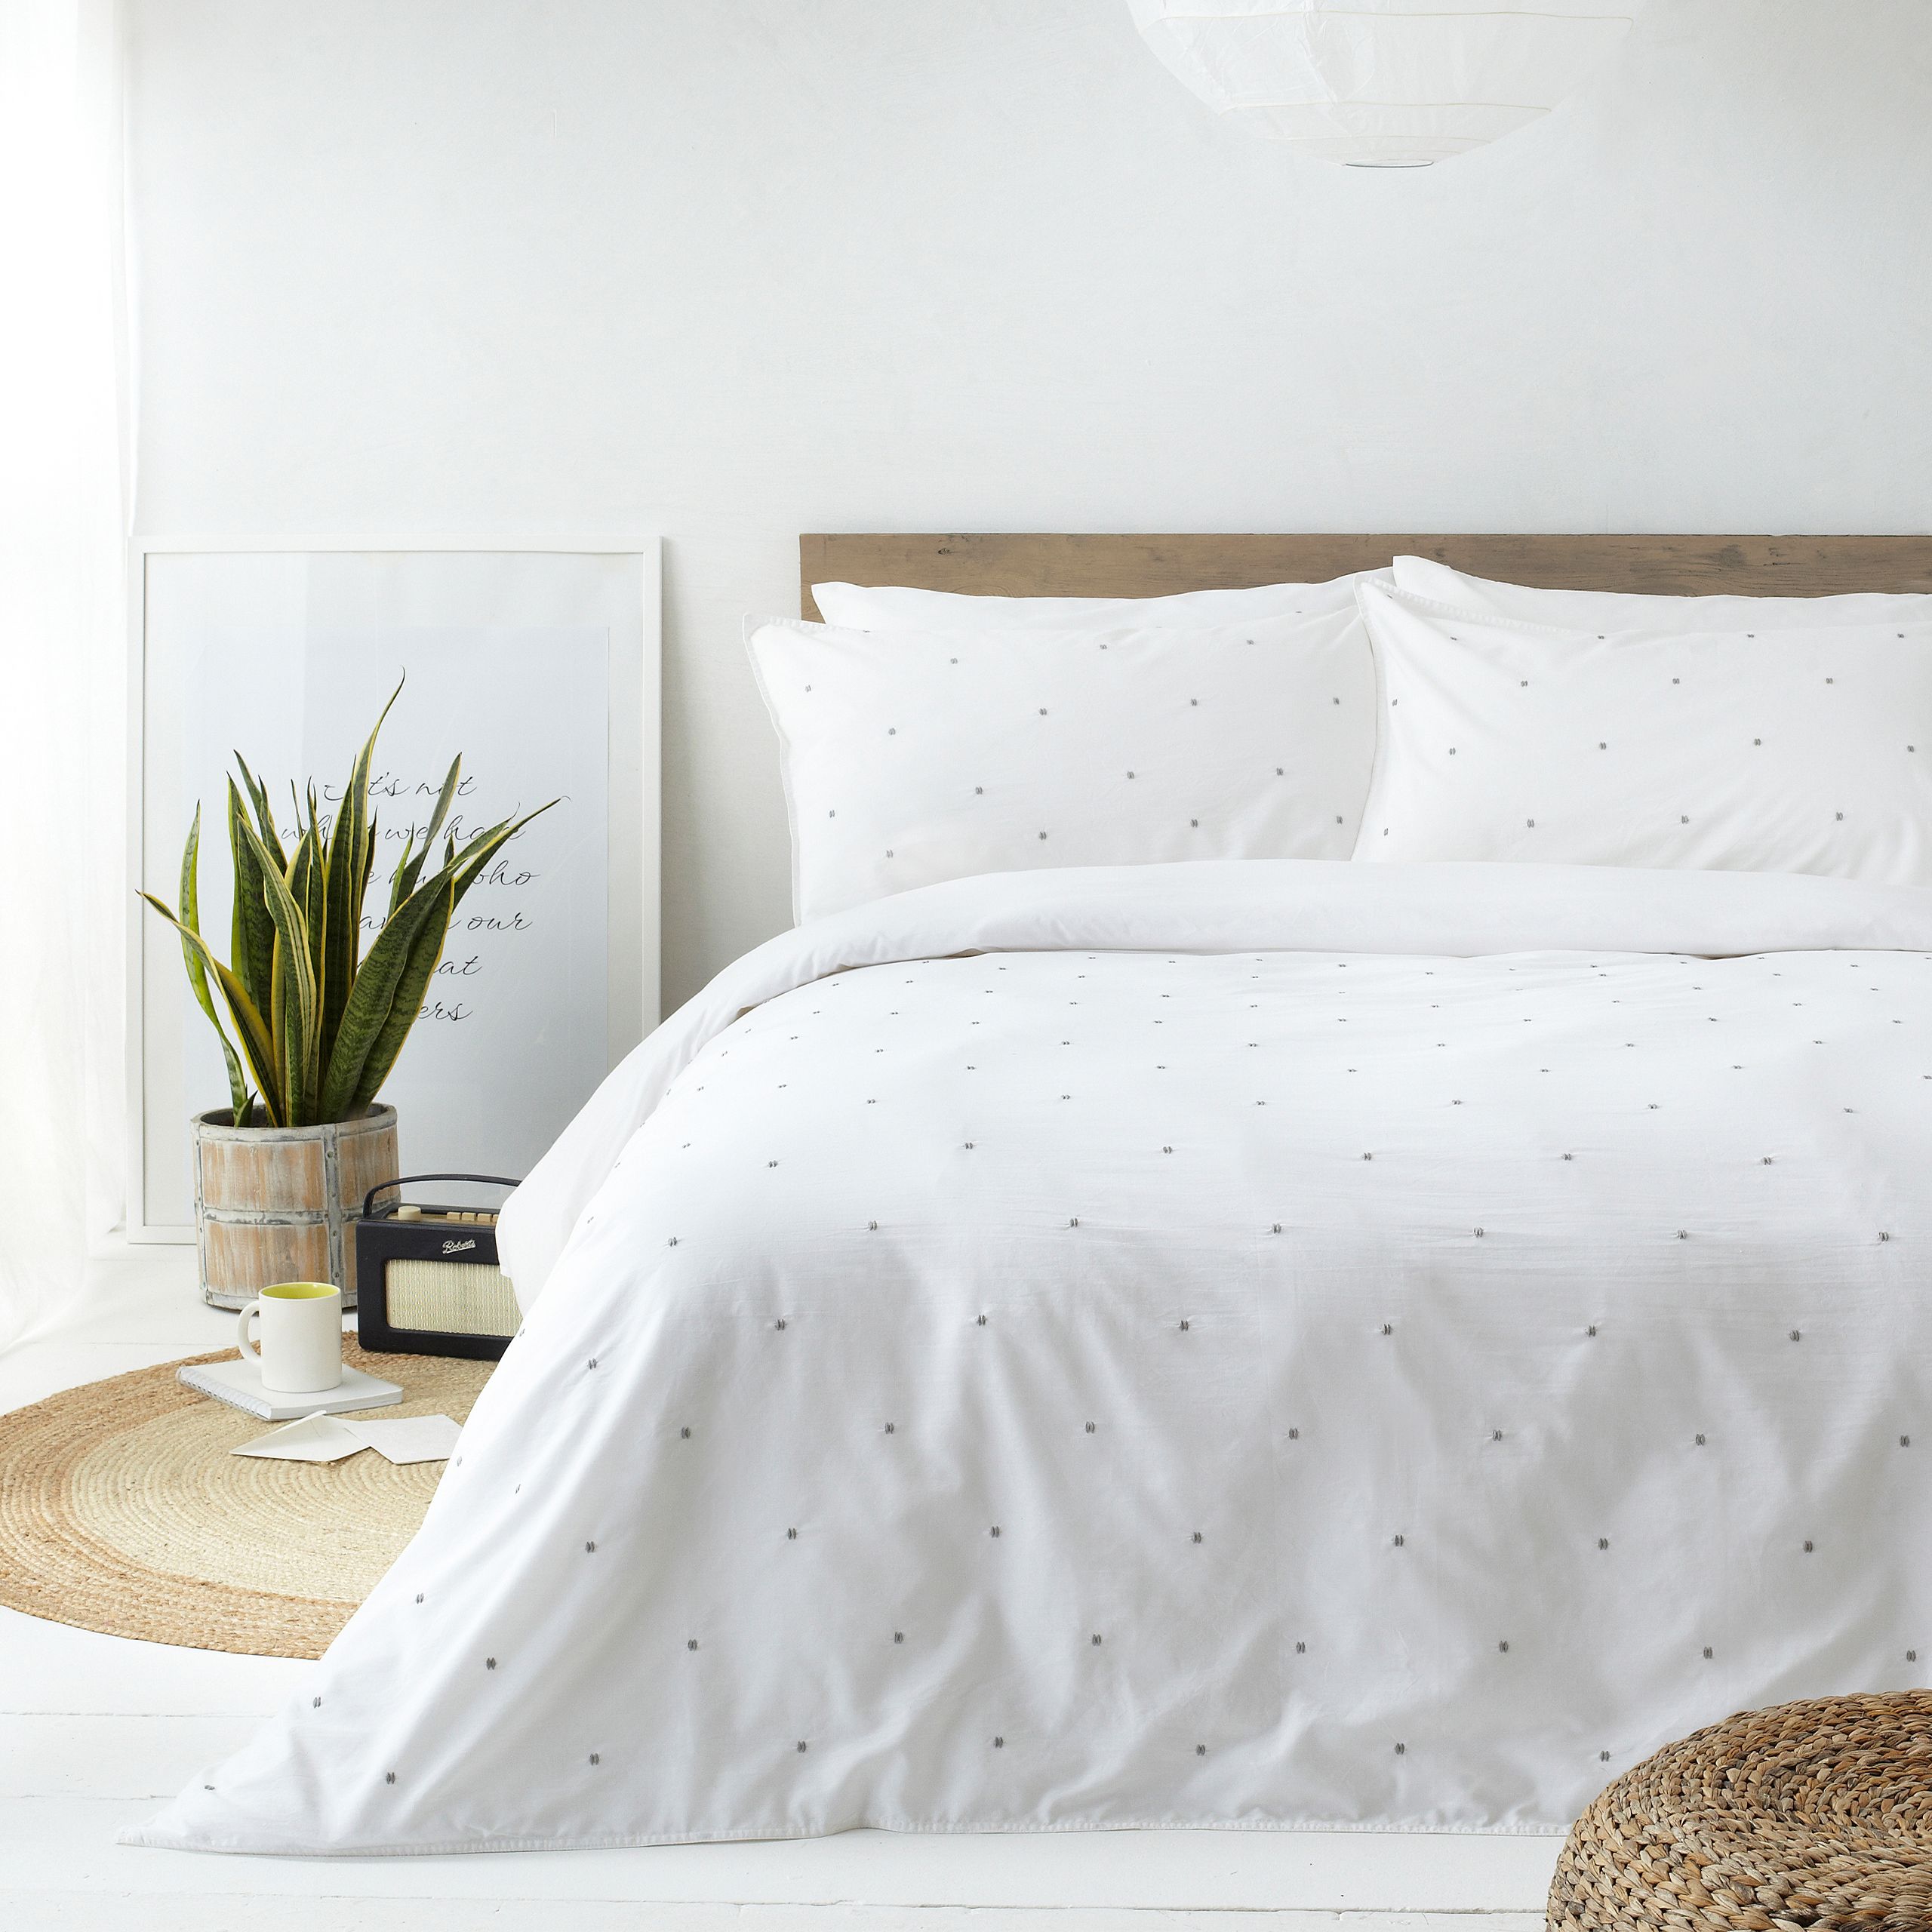 Add a fresh look to your interior with this washed cotton design that features an emboirdered stitch detailing. This duvet cover set is the perfect addition to any contemporary home.